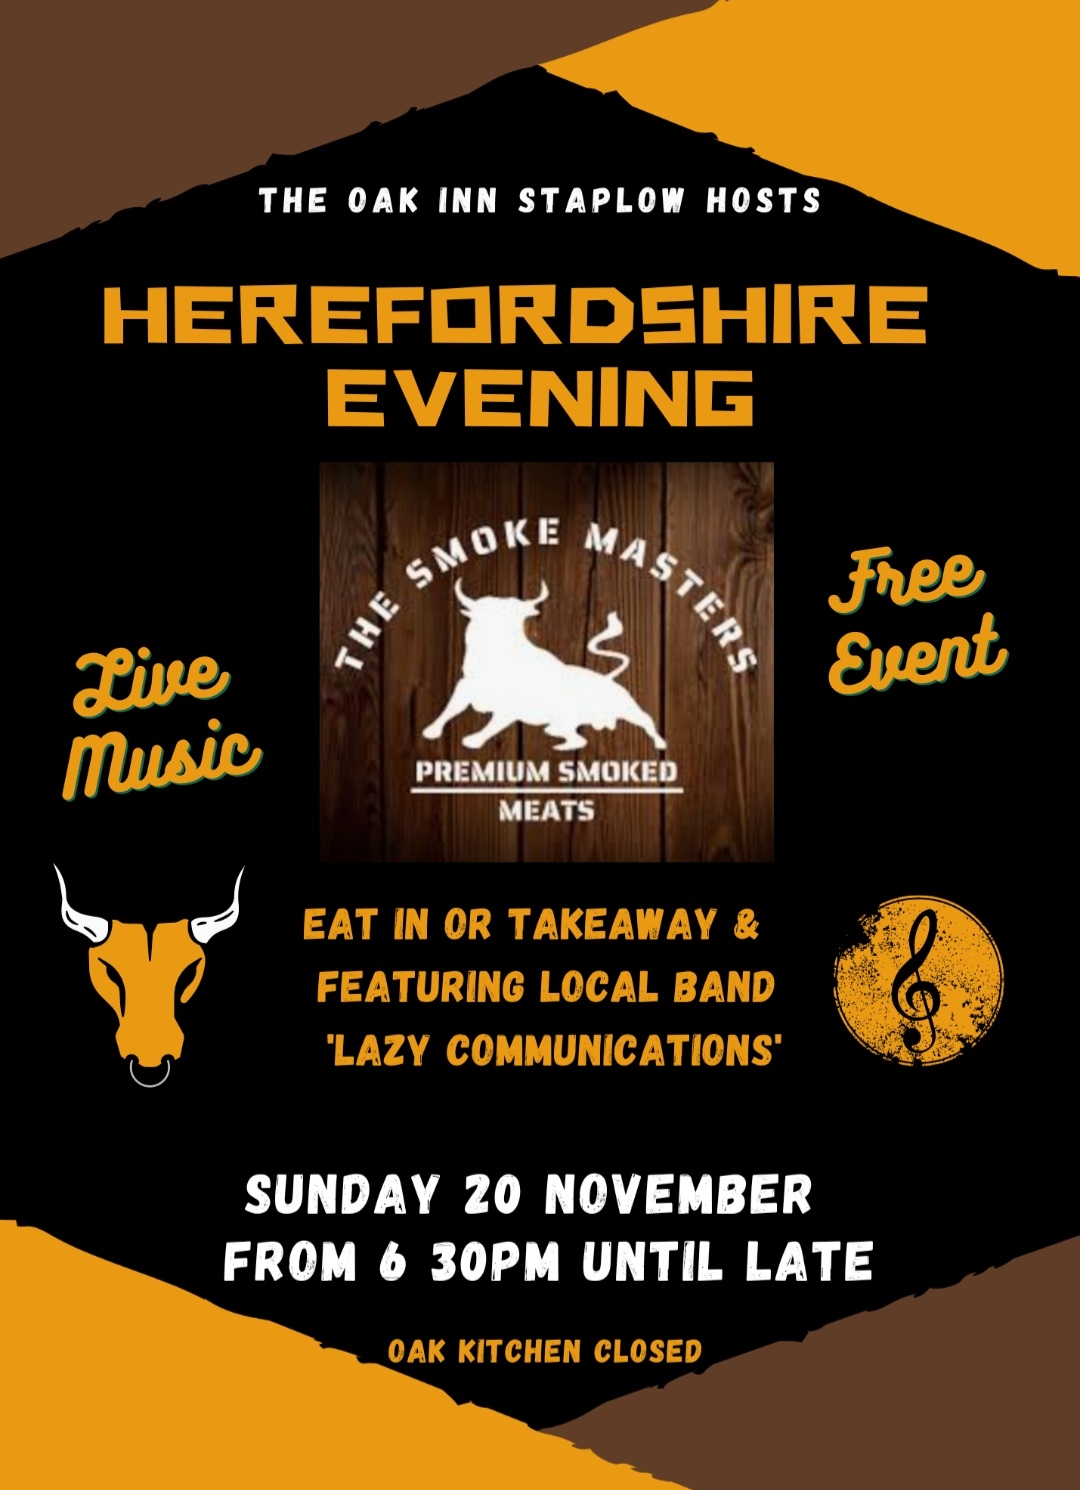 Live music and food event at The Oak Inn Staplow Ledbury Herefordshire